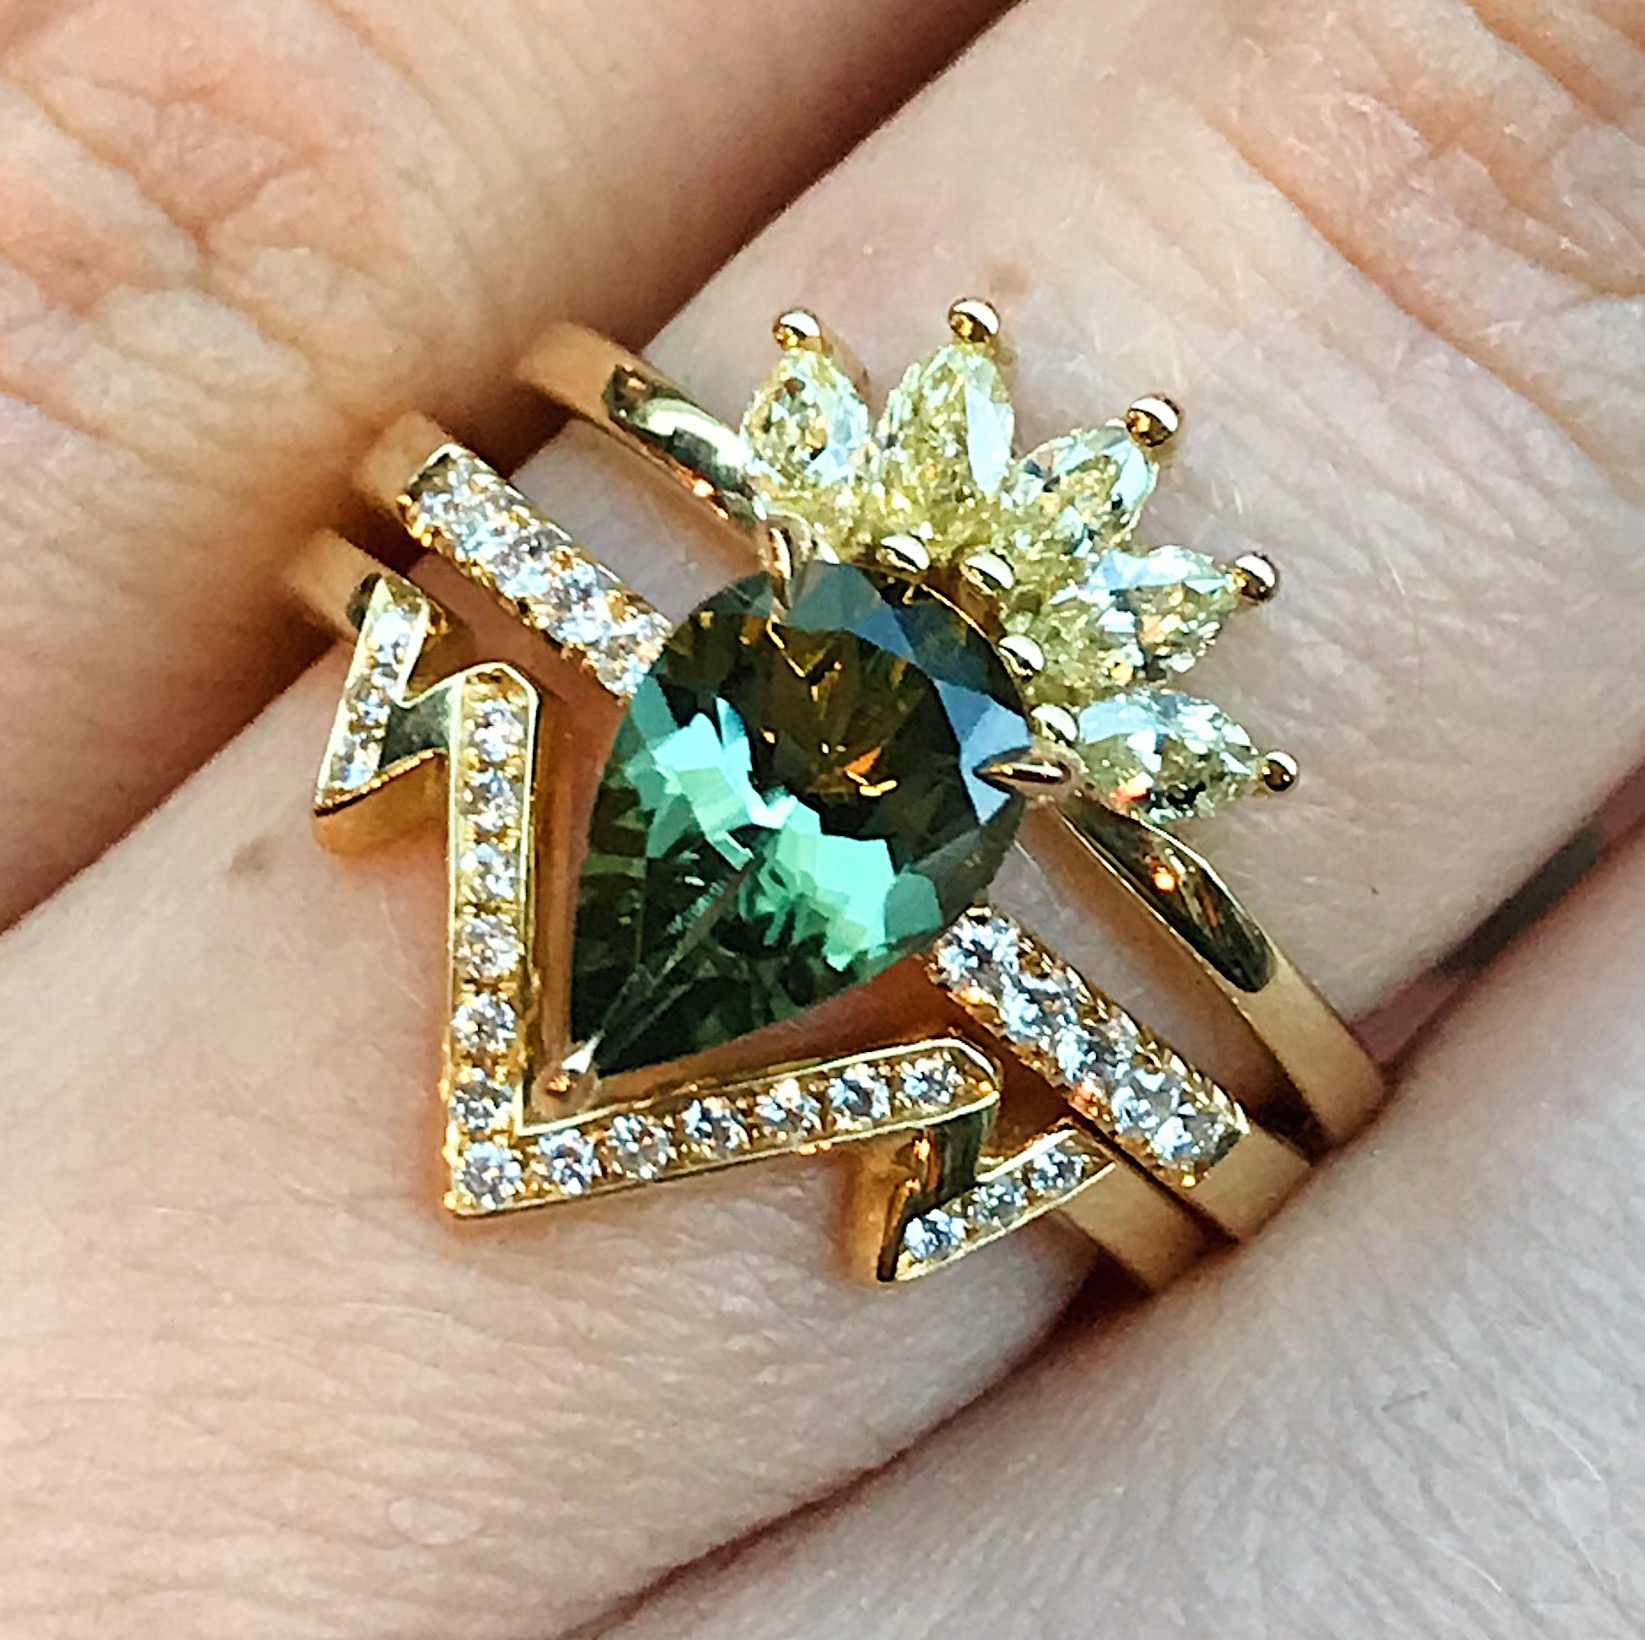 18ct yellow gold and pear-shaped Tourmaline engagement ring